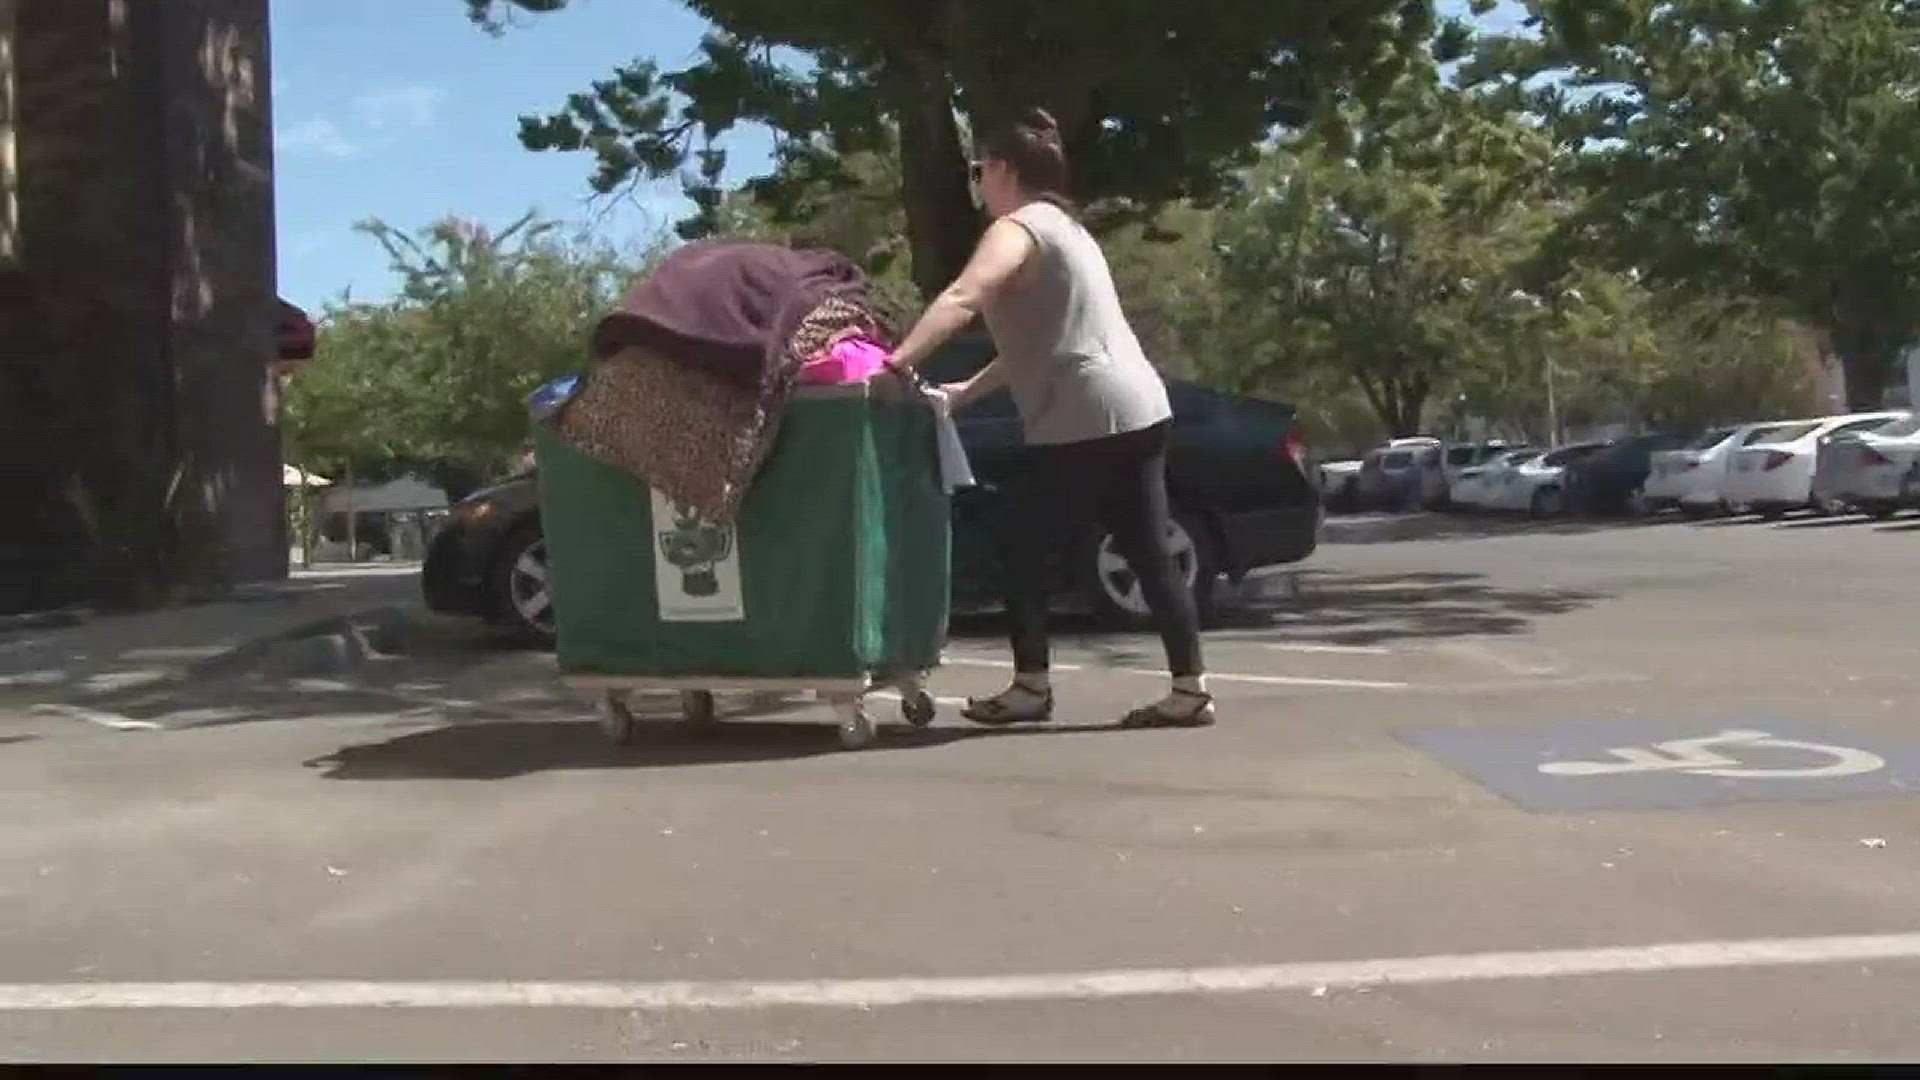 This weekend more than 2,100 students moved in to on-campus housing at California State University, Sacramento.